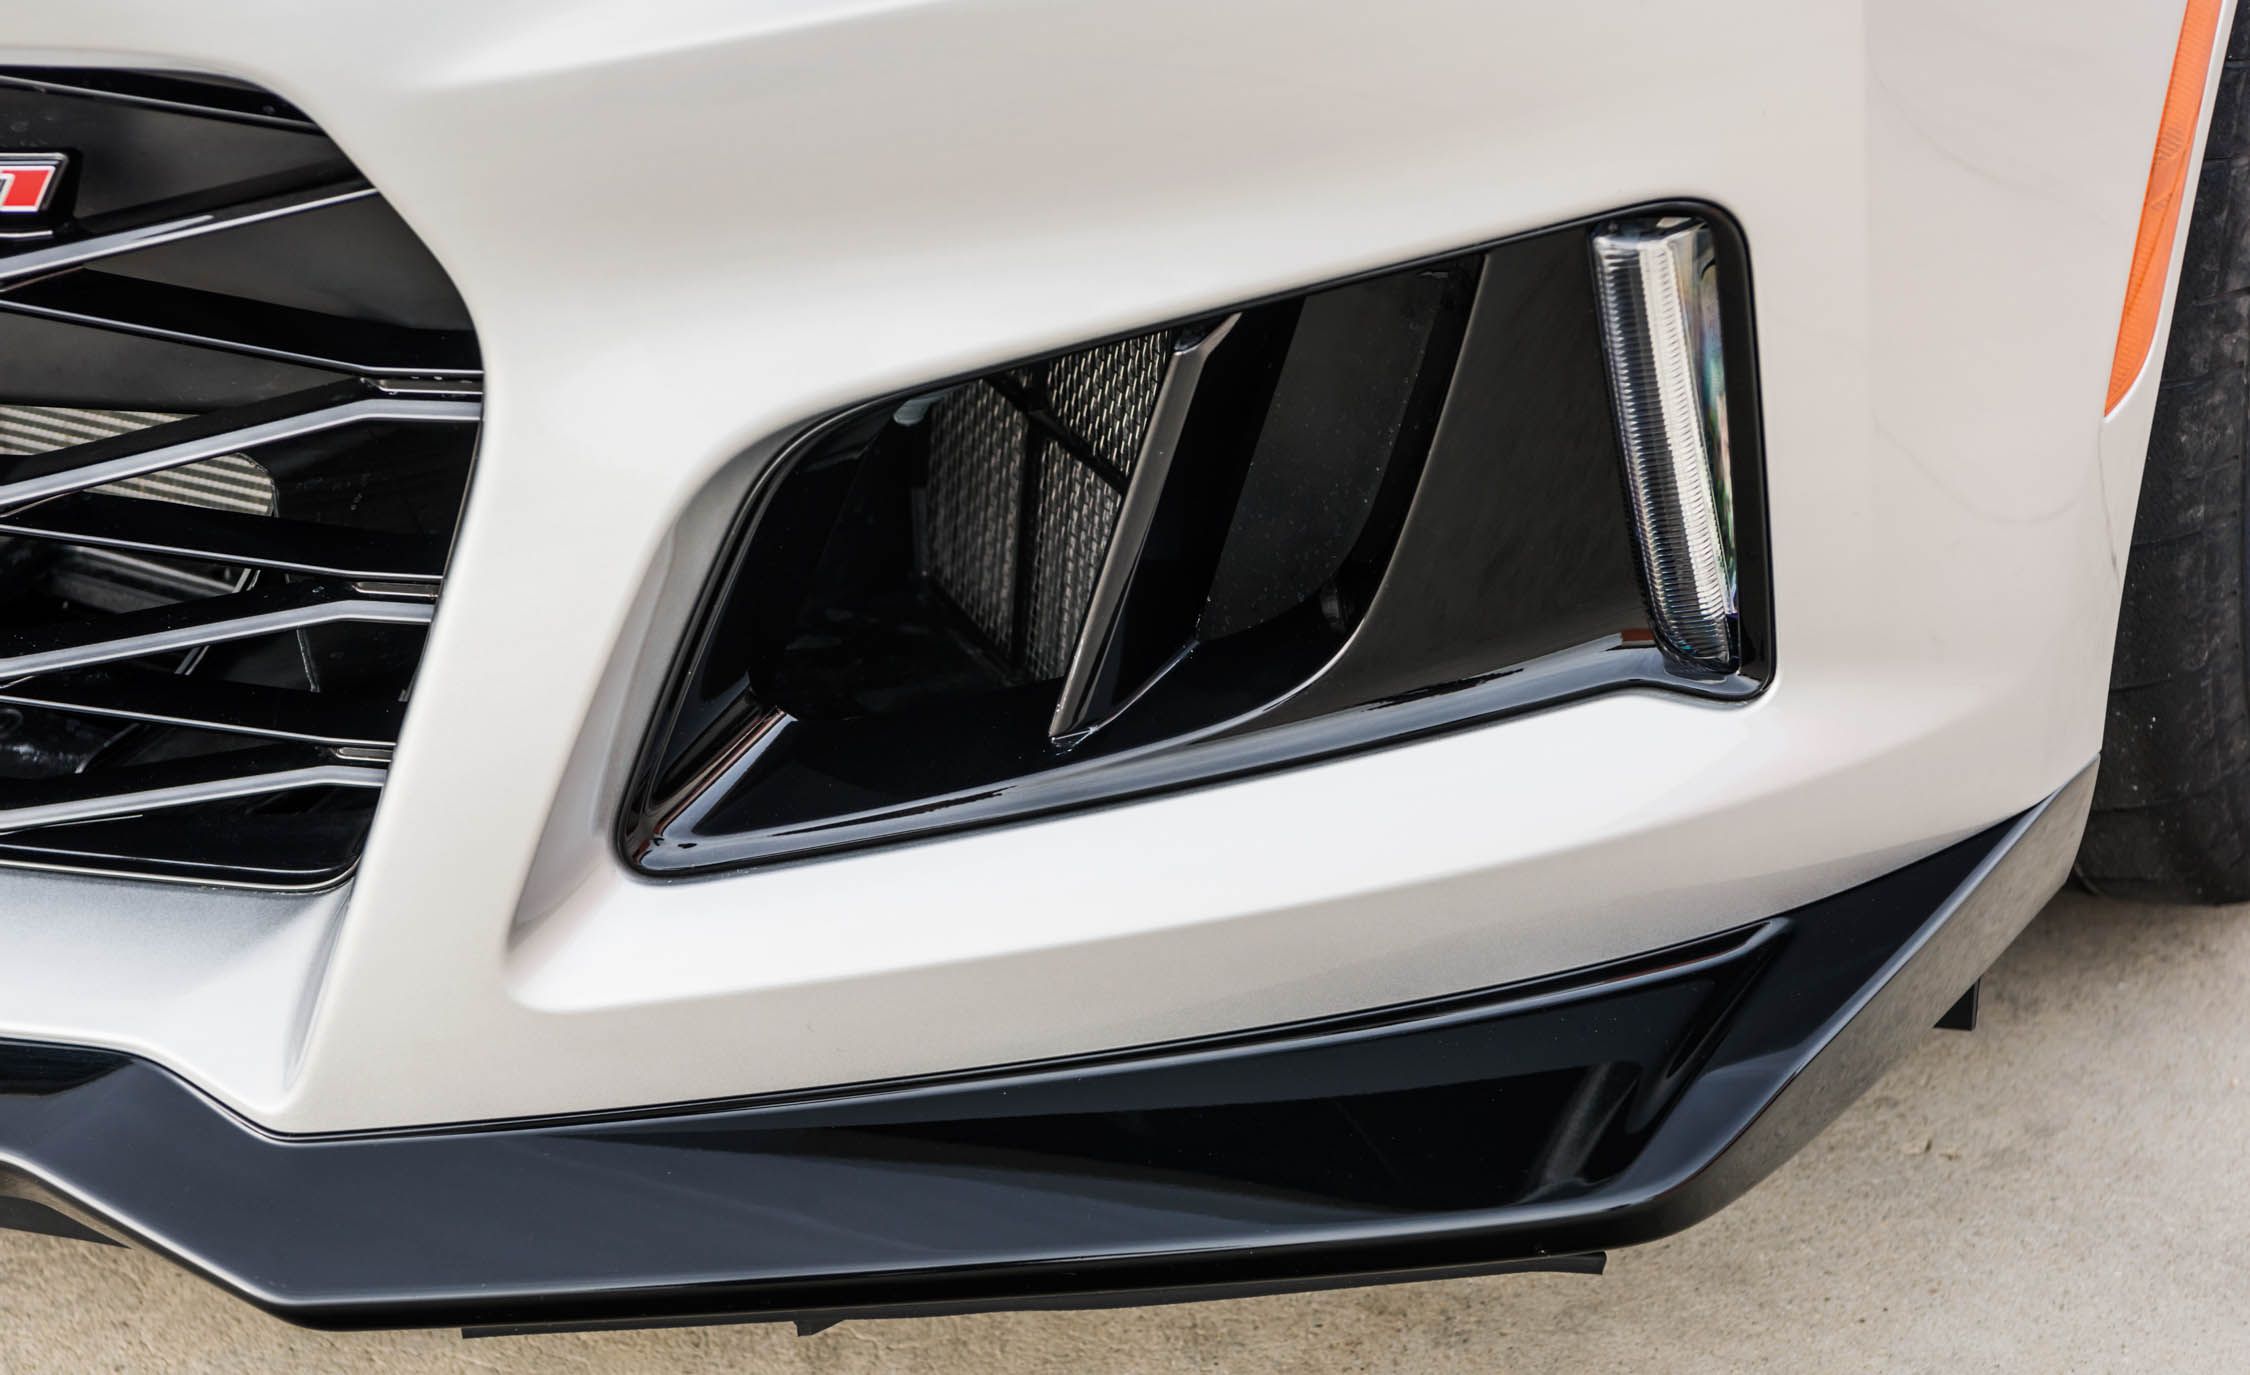 2017 Chevrolet Camaro Zl1 White Exterior View Front Air Flow Vent (View 20 of 62)